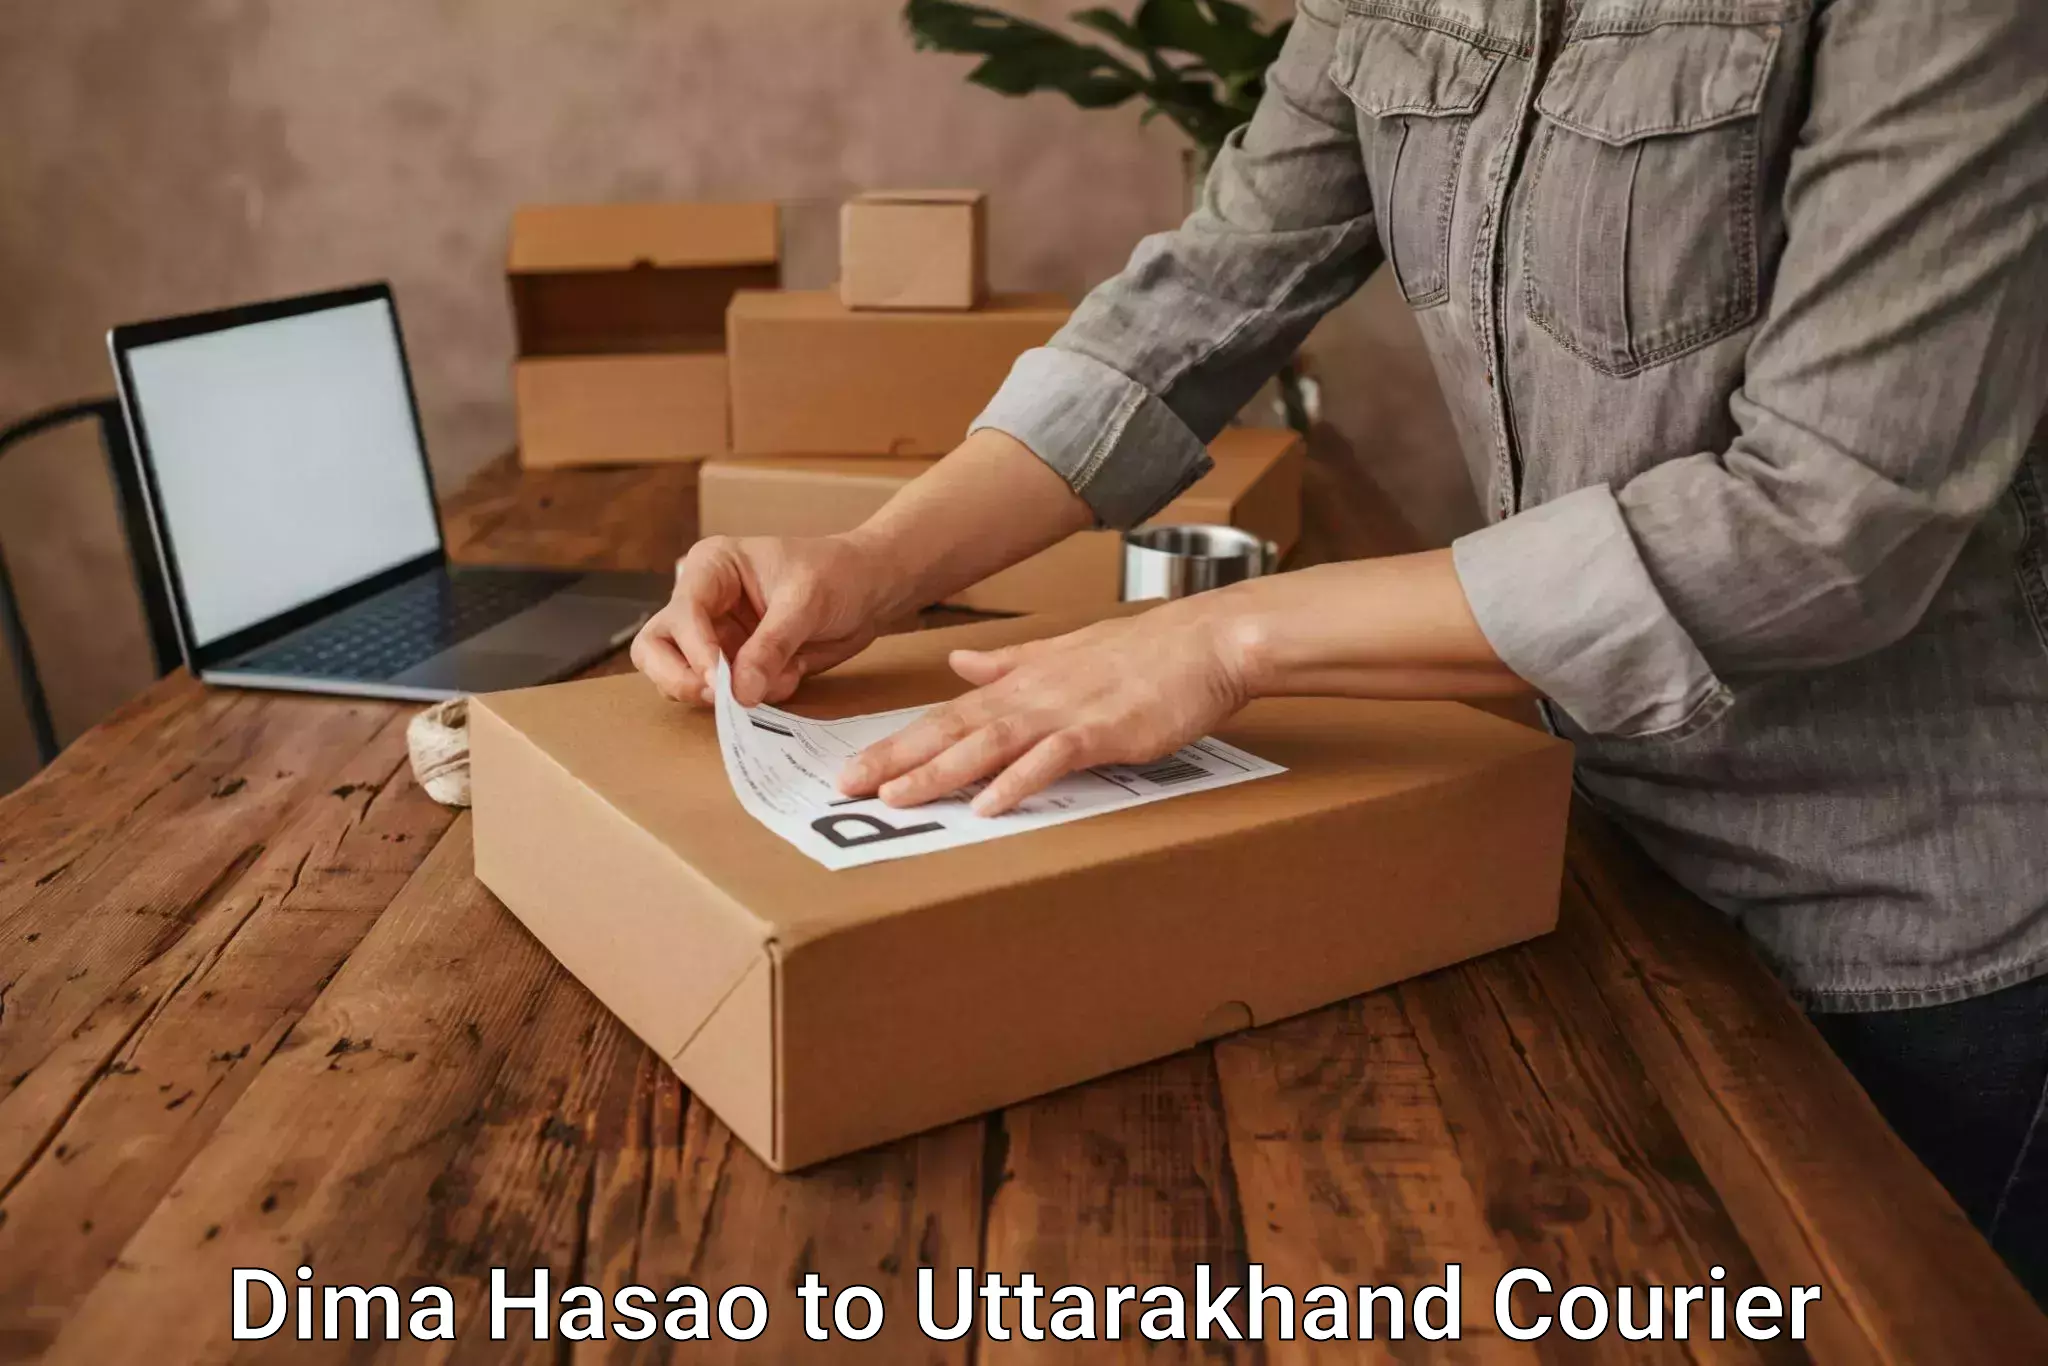 Express delivery network Dima Hasao to Uttarakhand